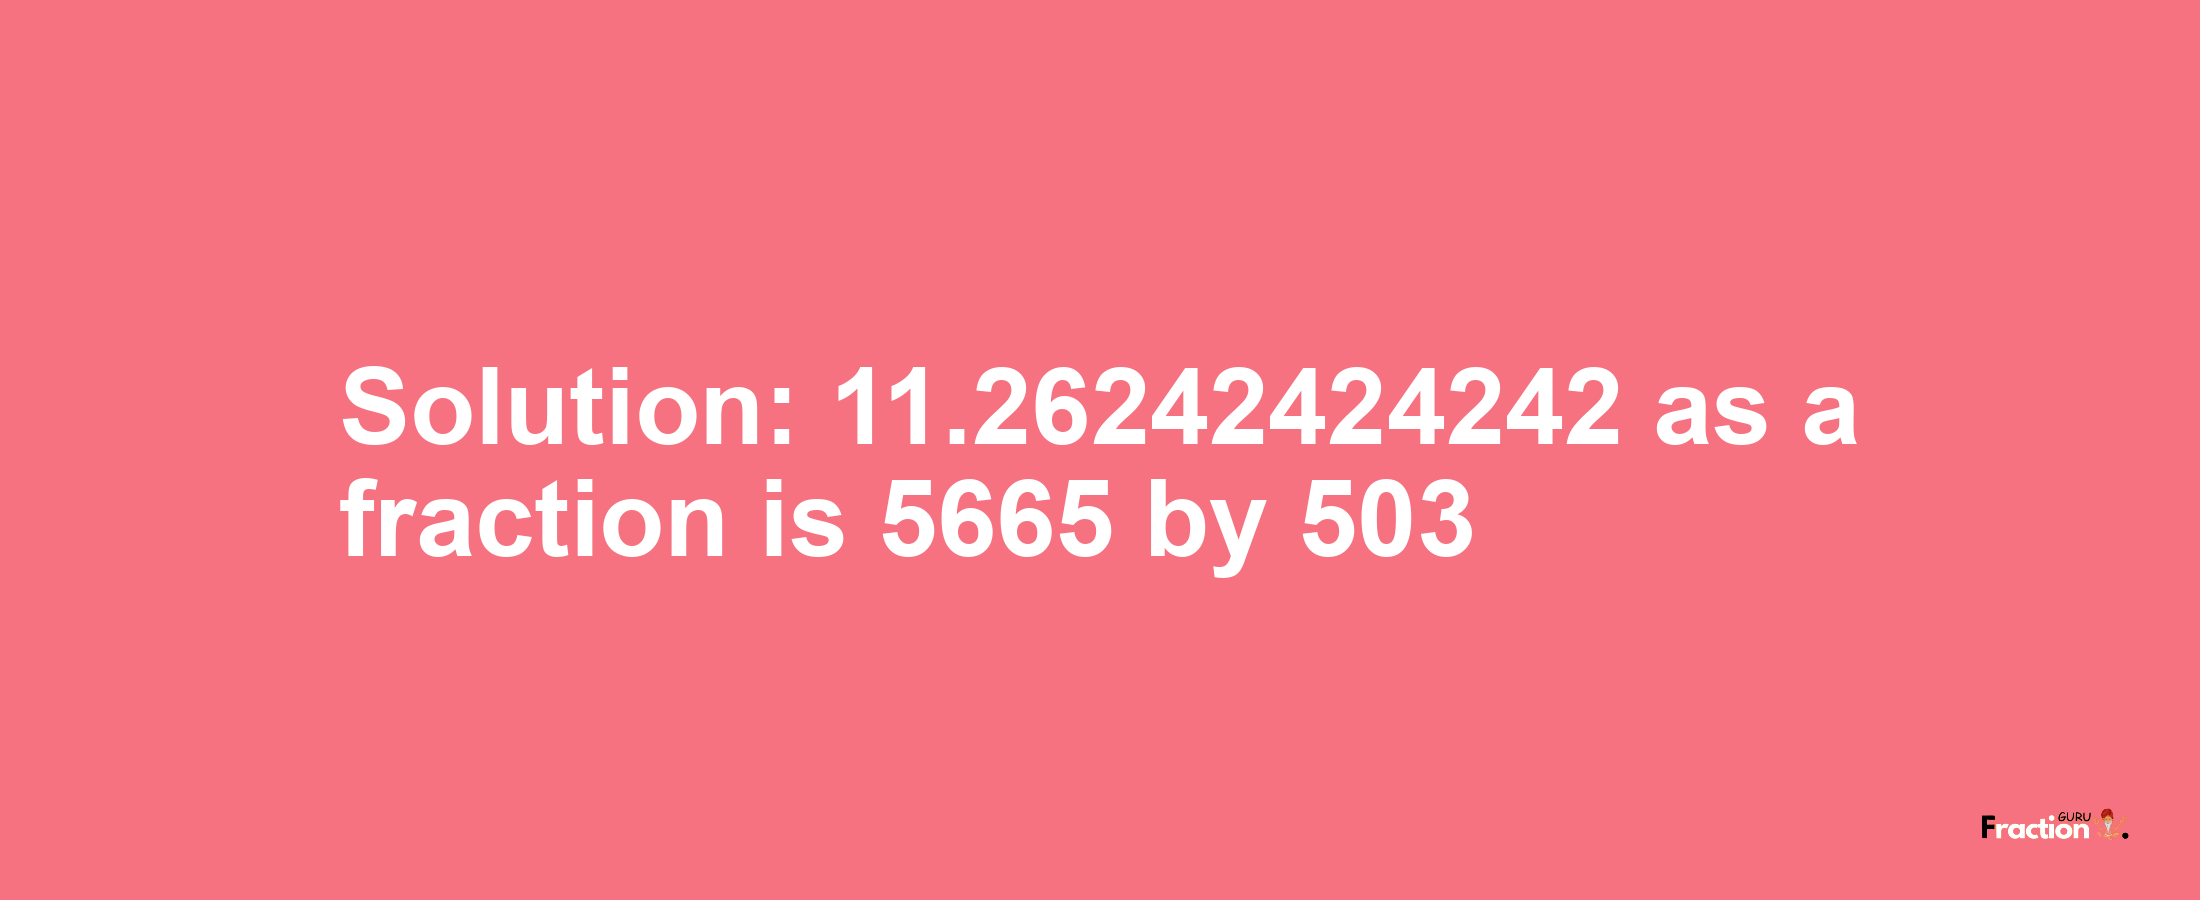 Solution:11.26242424242 as a fraction is 5665/503